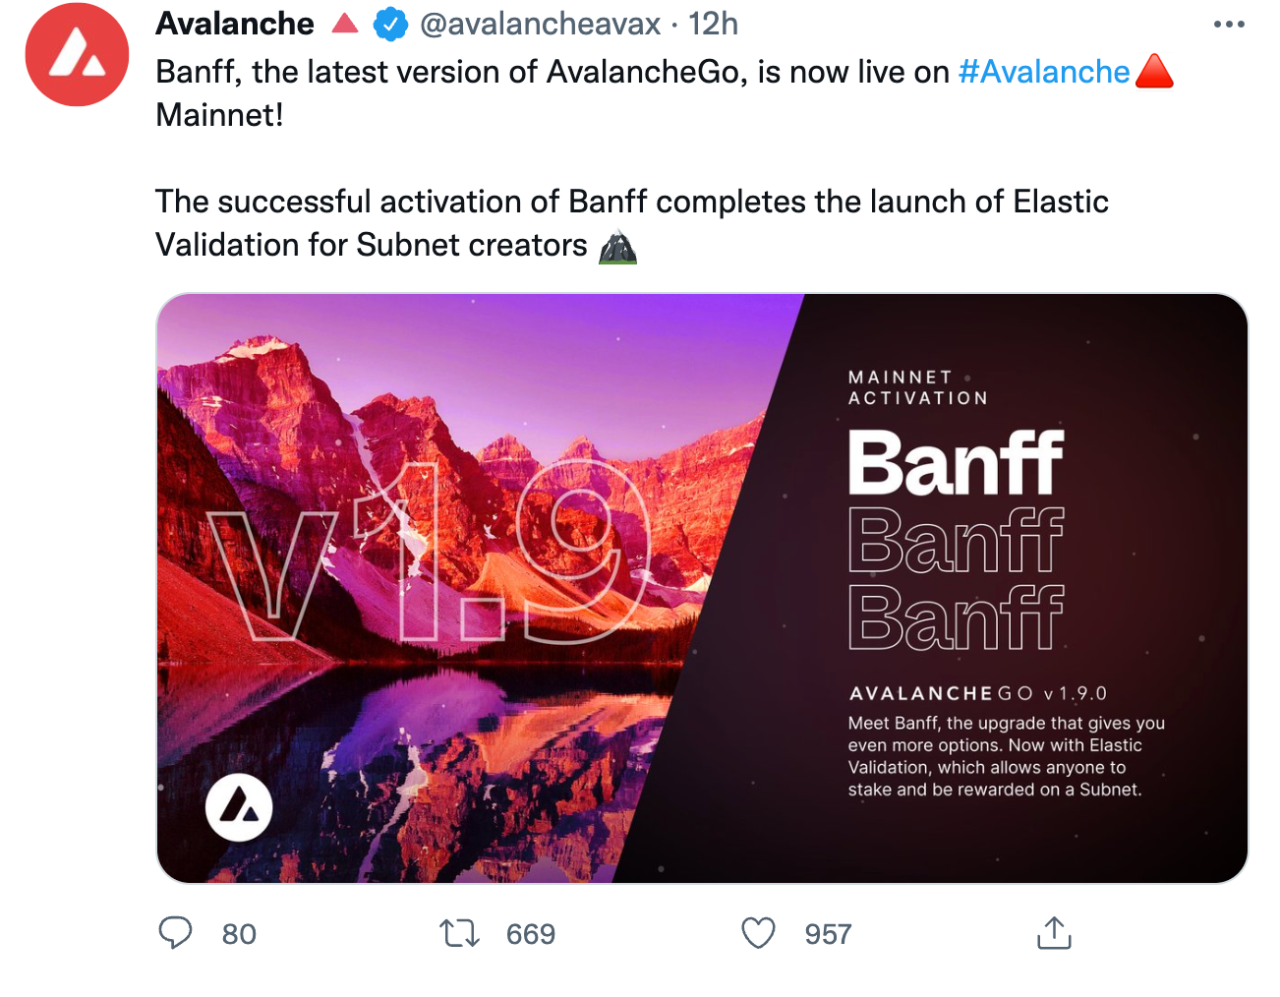 Bybit: Velocity of DAI Skyrockets, Avalanche Completes Banff Upgrade 2